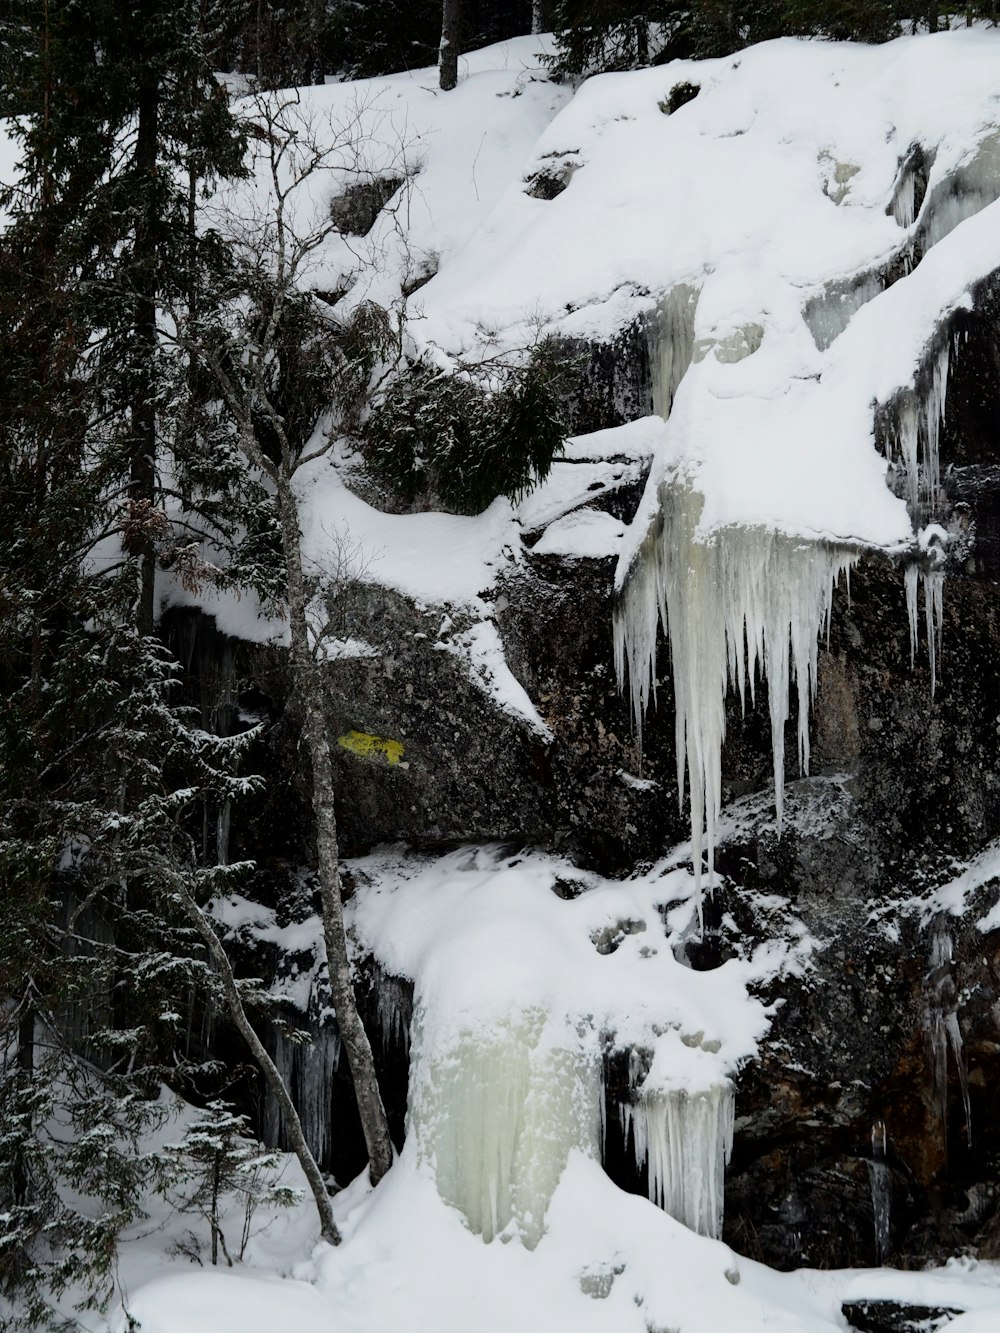 a frozen waterfall in the middle of a forest